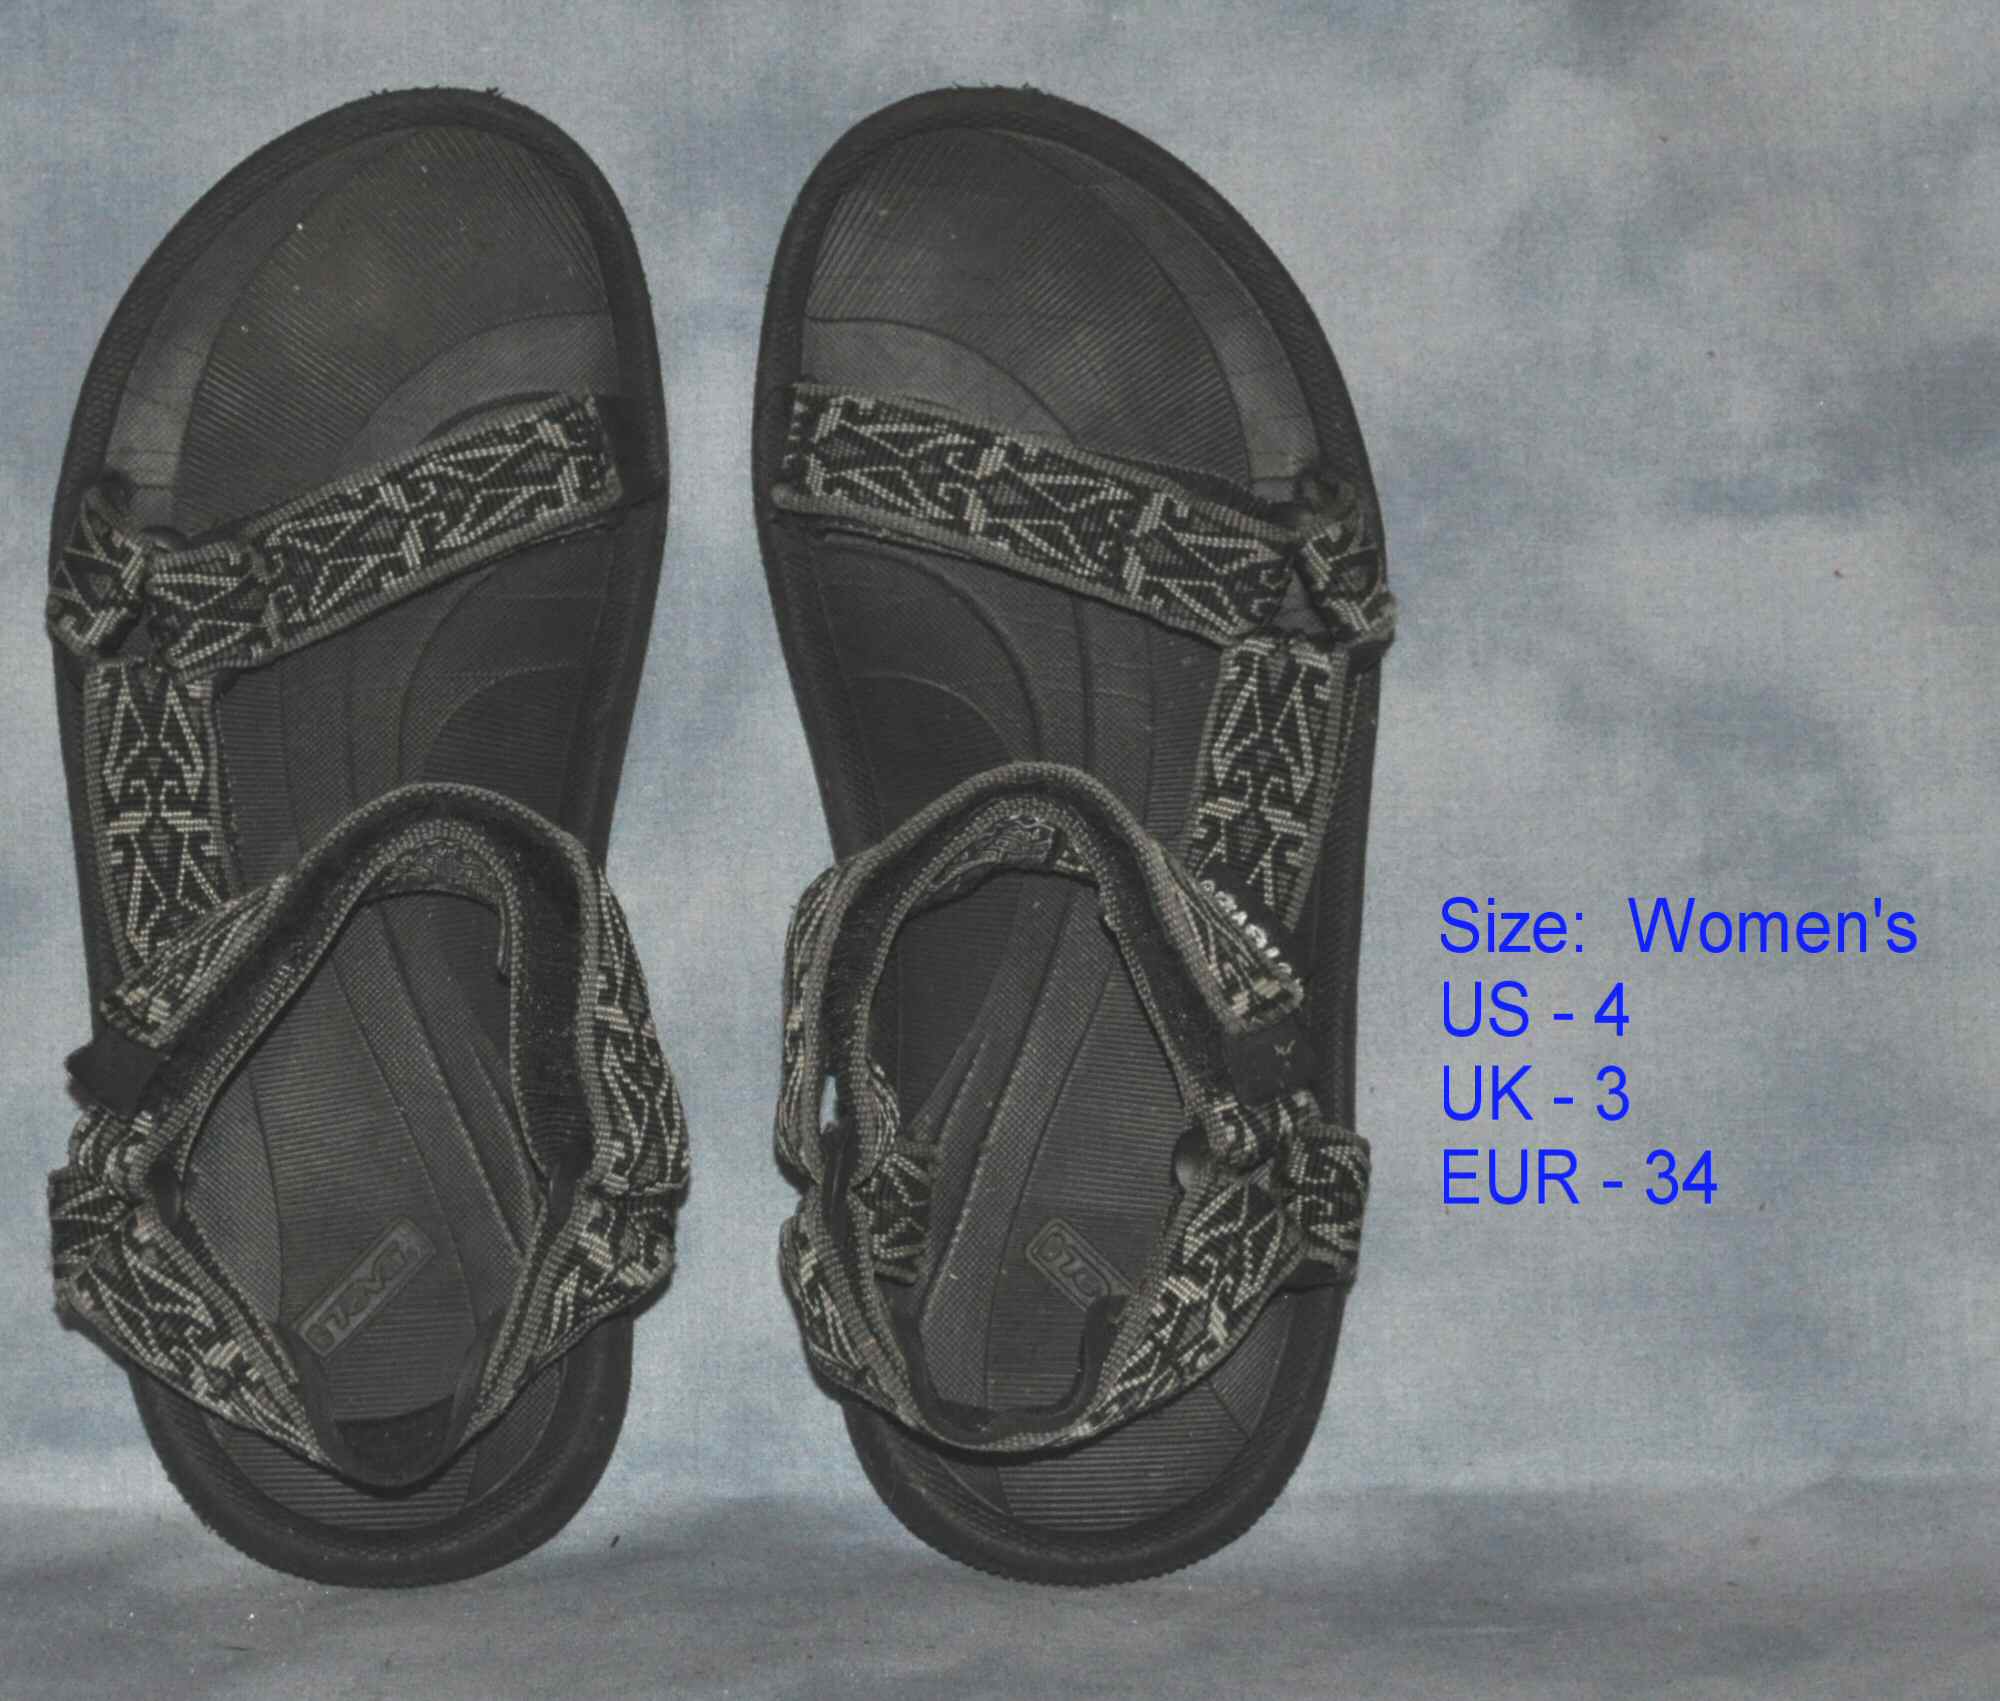 Details about Womens size 4 TEVA Water Sandals hiking shoes 2776